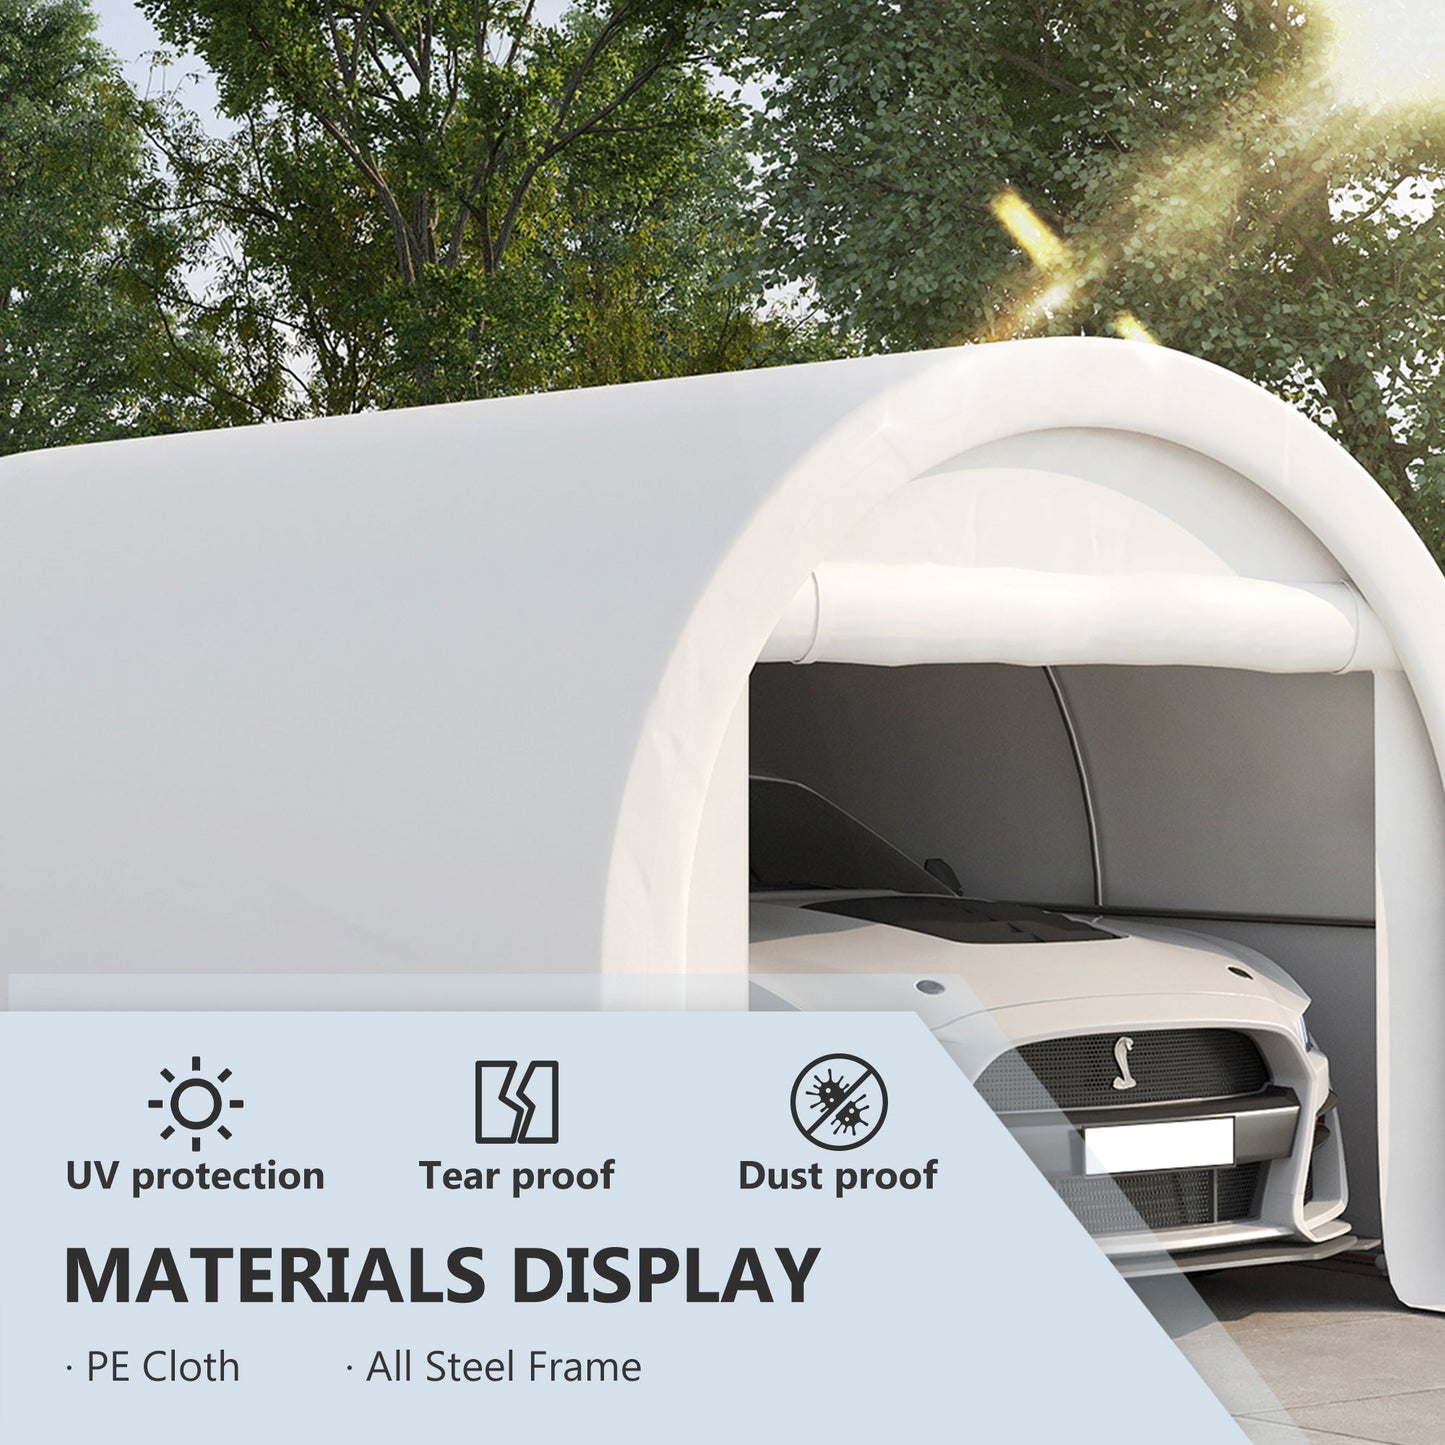 -Outsunny 16' x 10' Carport, Heavy Duty Portable Garage / Storage Tent with Large Zippered Door, Anti-UV PE Canopy Cover for Car, Truck, Boat, - Outdoor Style Company